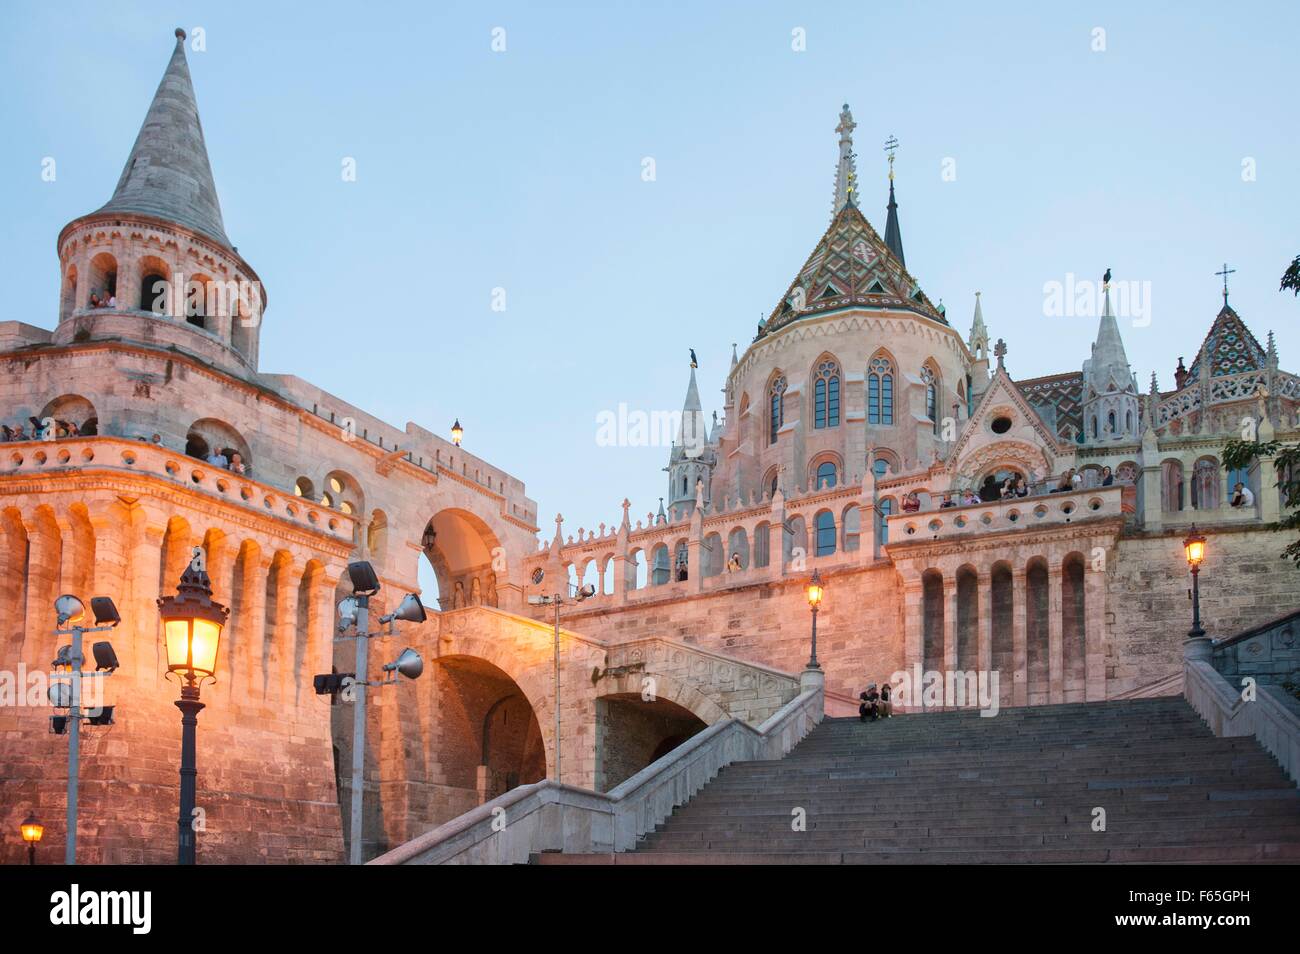 The fishermen's bastion at dusk, constructed between 1895 and 1902 in the neo-romantic style, Budapest, Hungary Stock Photo